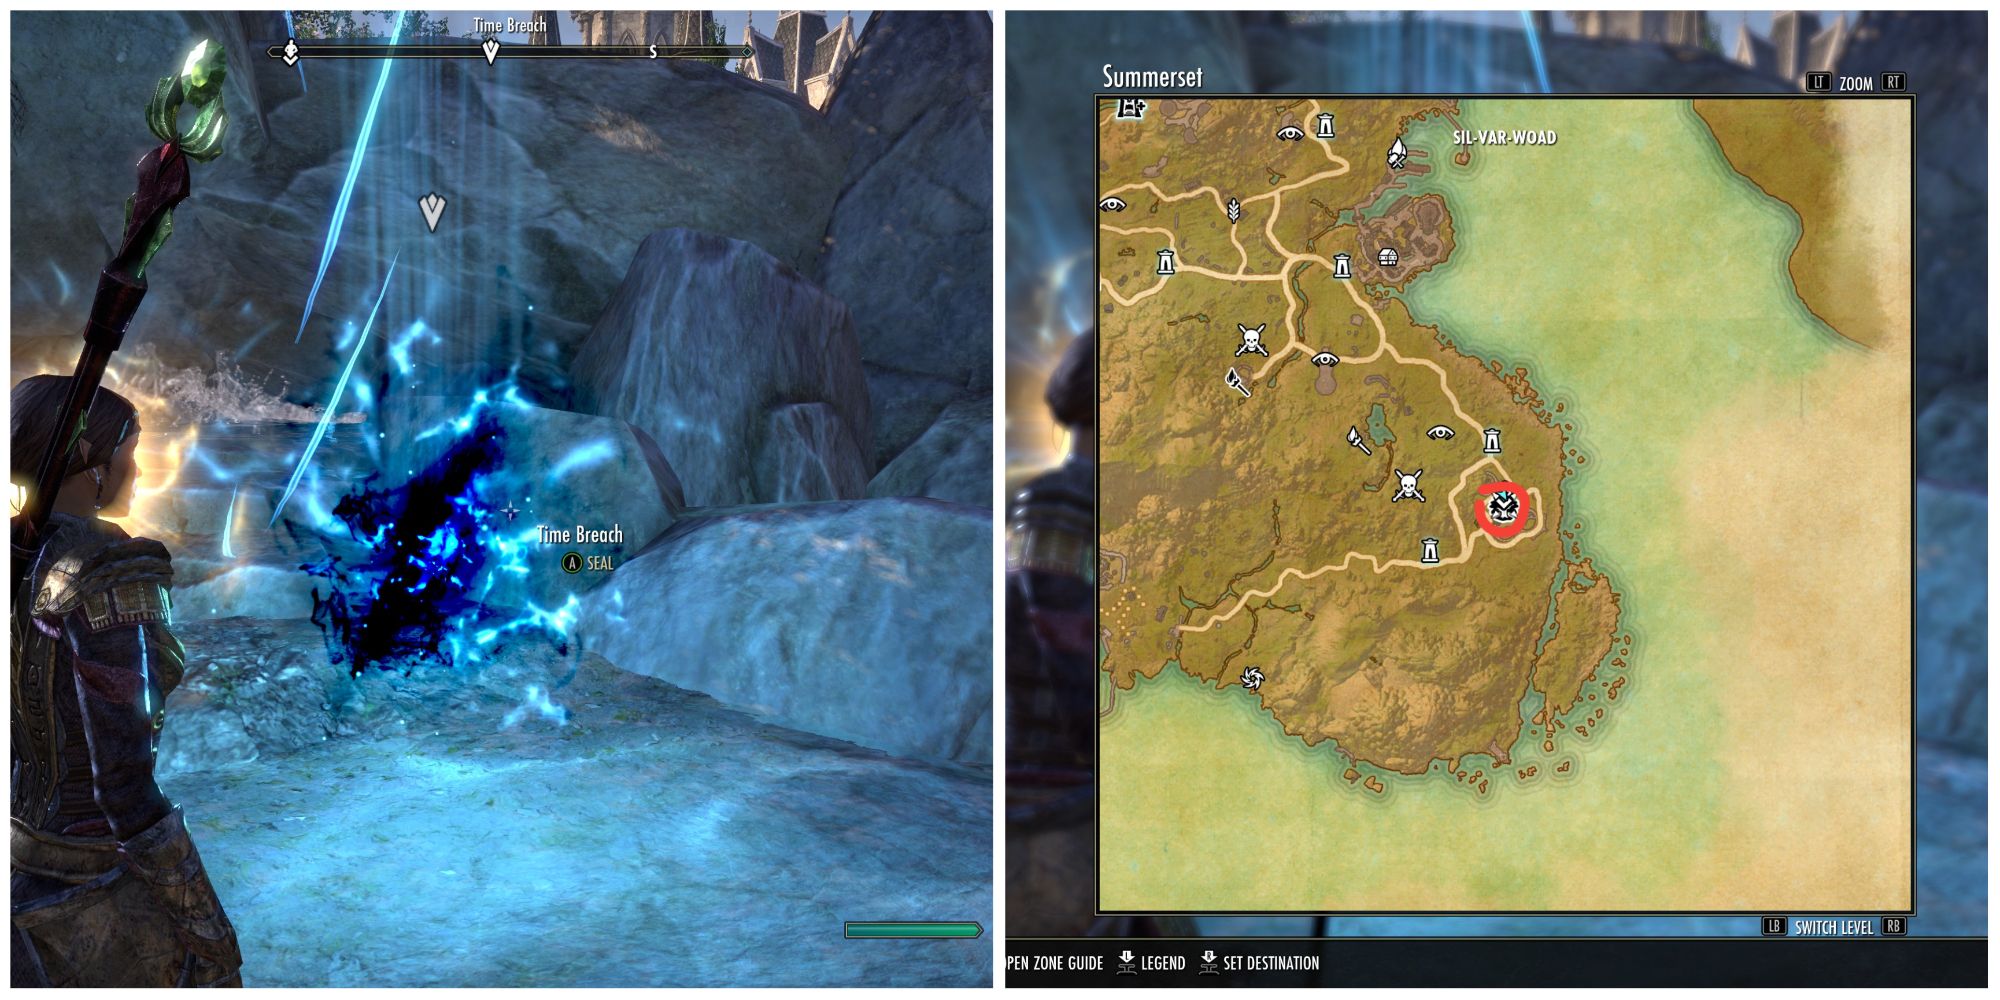 Seventh time breach location in Summerset